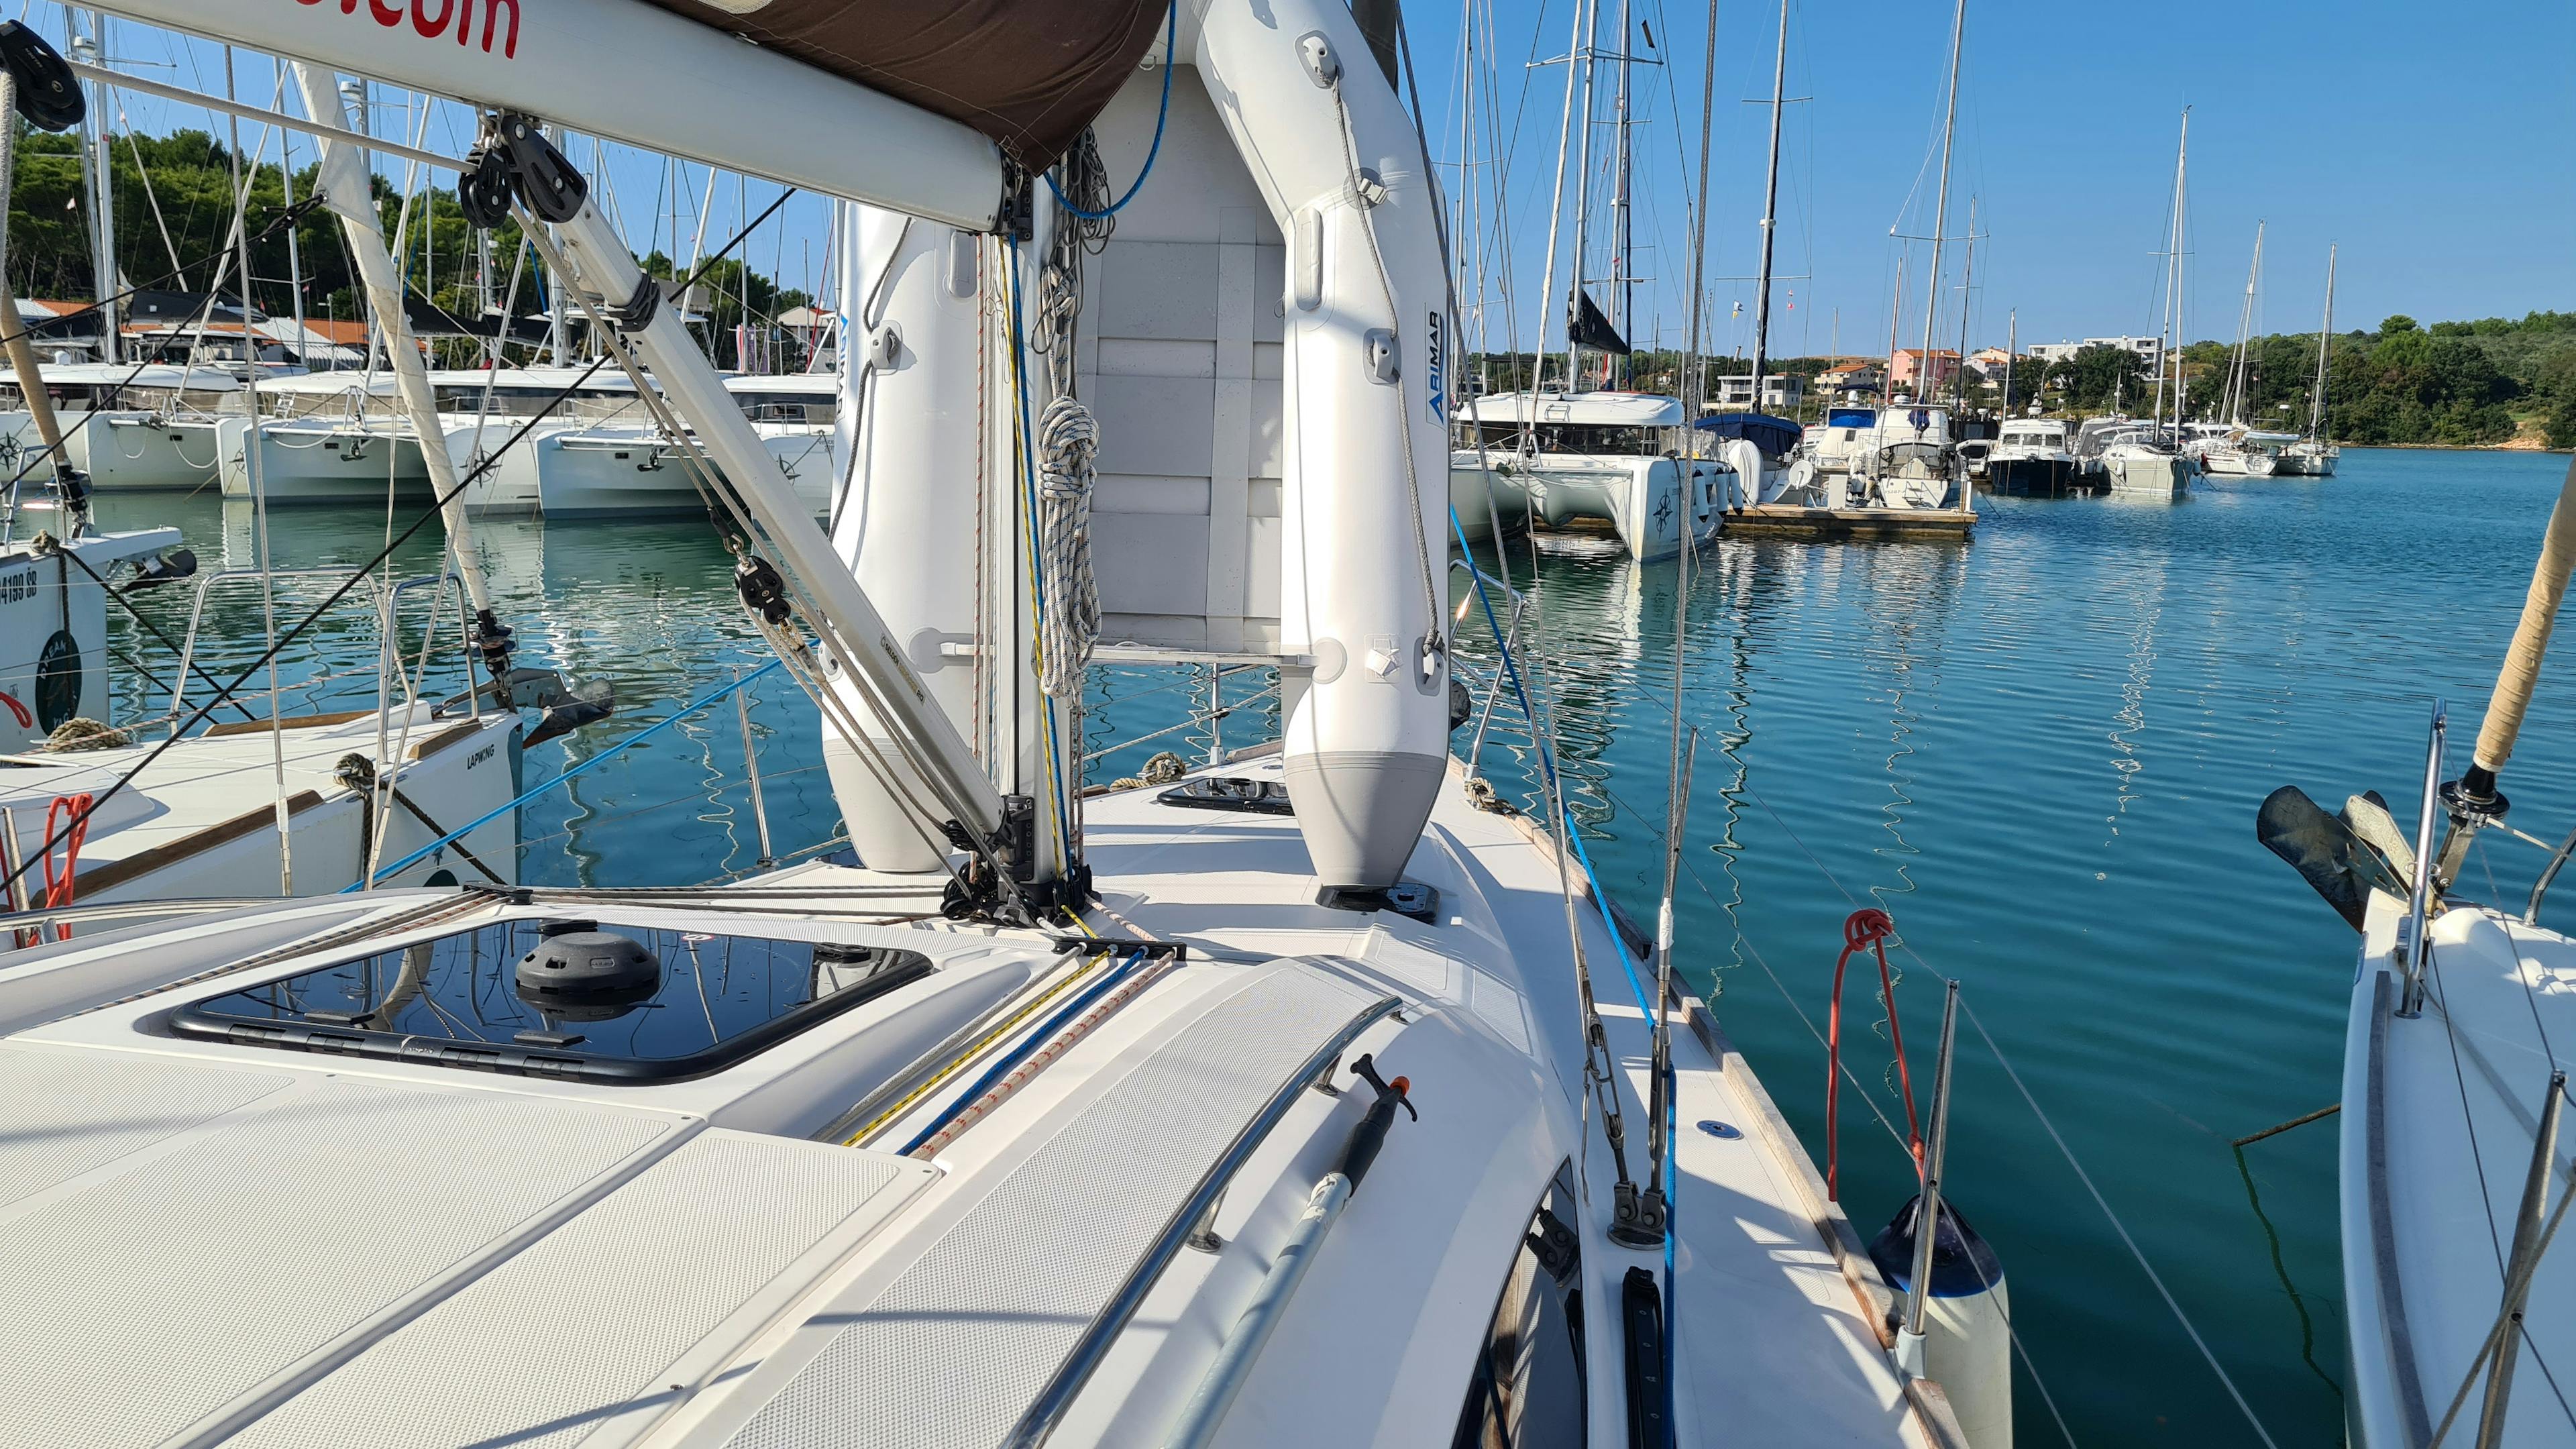 Book Elan Impression 40 Sailing yacht for bareboat charter in Pula, ACI Marina Pomer, Istra, Croatia with TripYacht!, picture 6